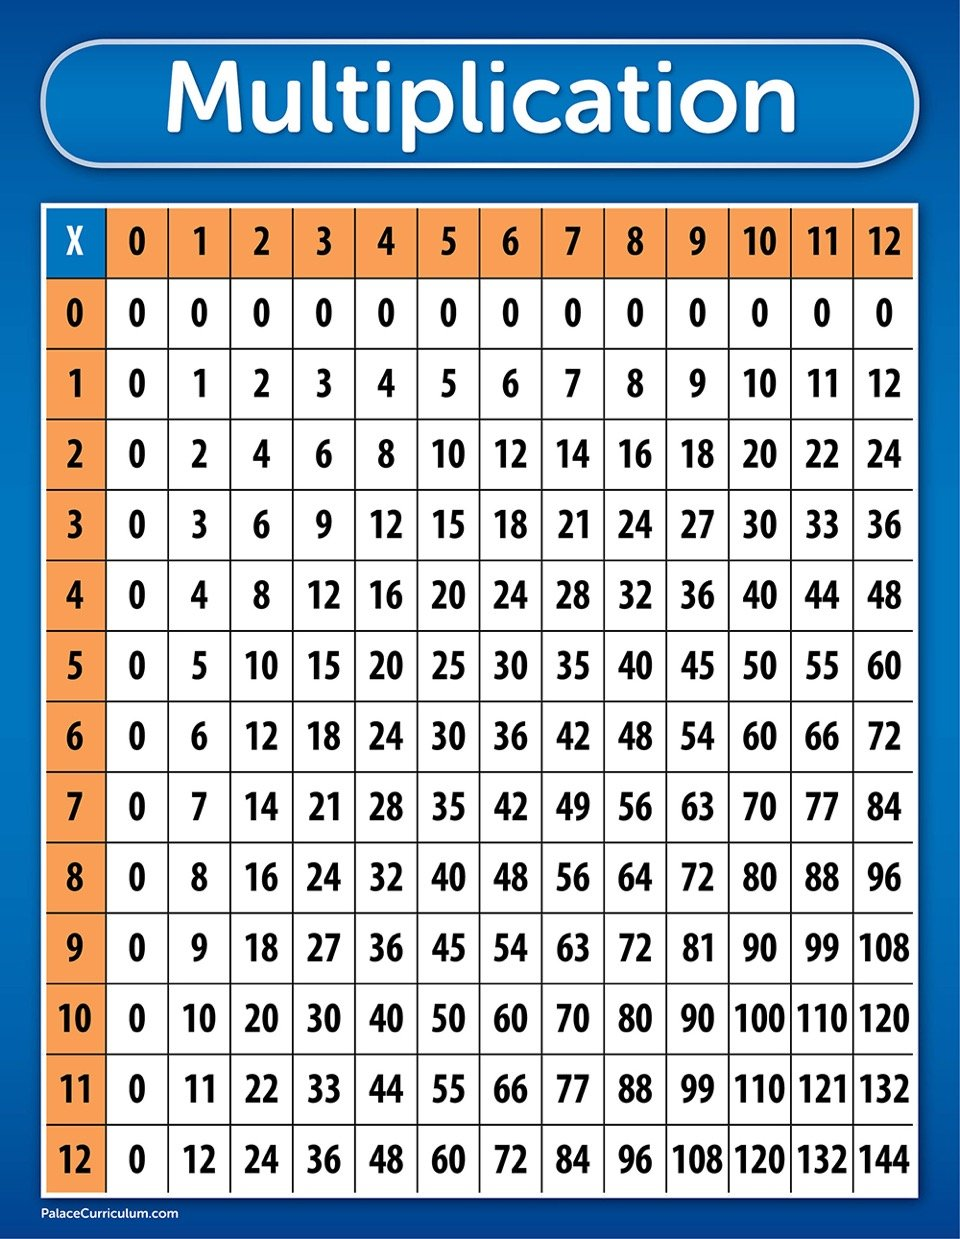 Multiplication Table Chart Poster - Laminated 17 X 22 | Ebay